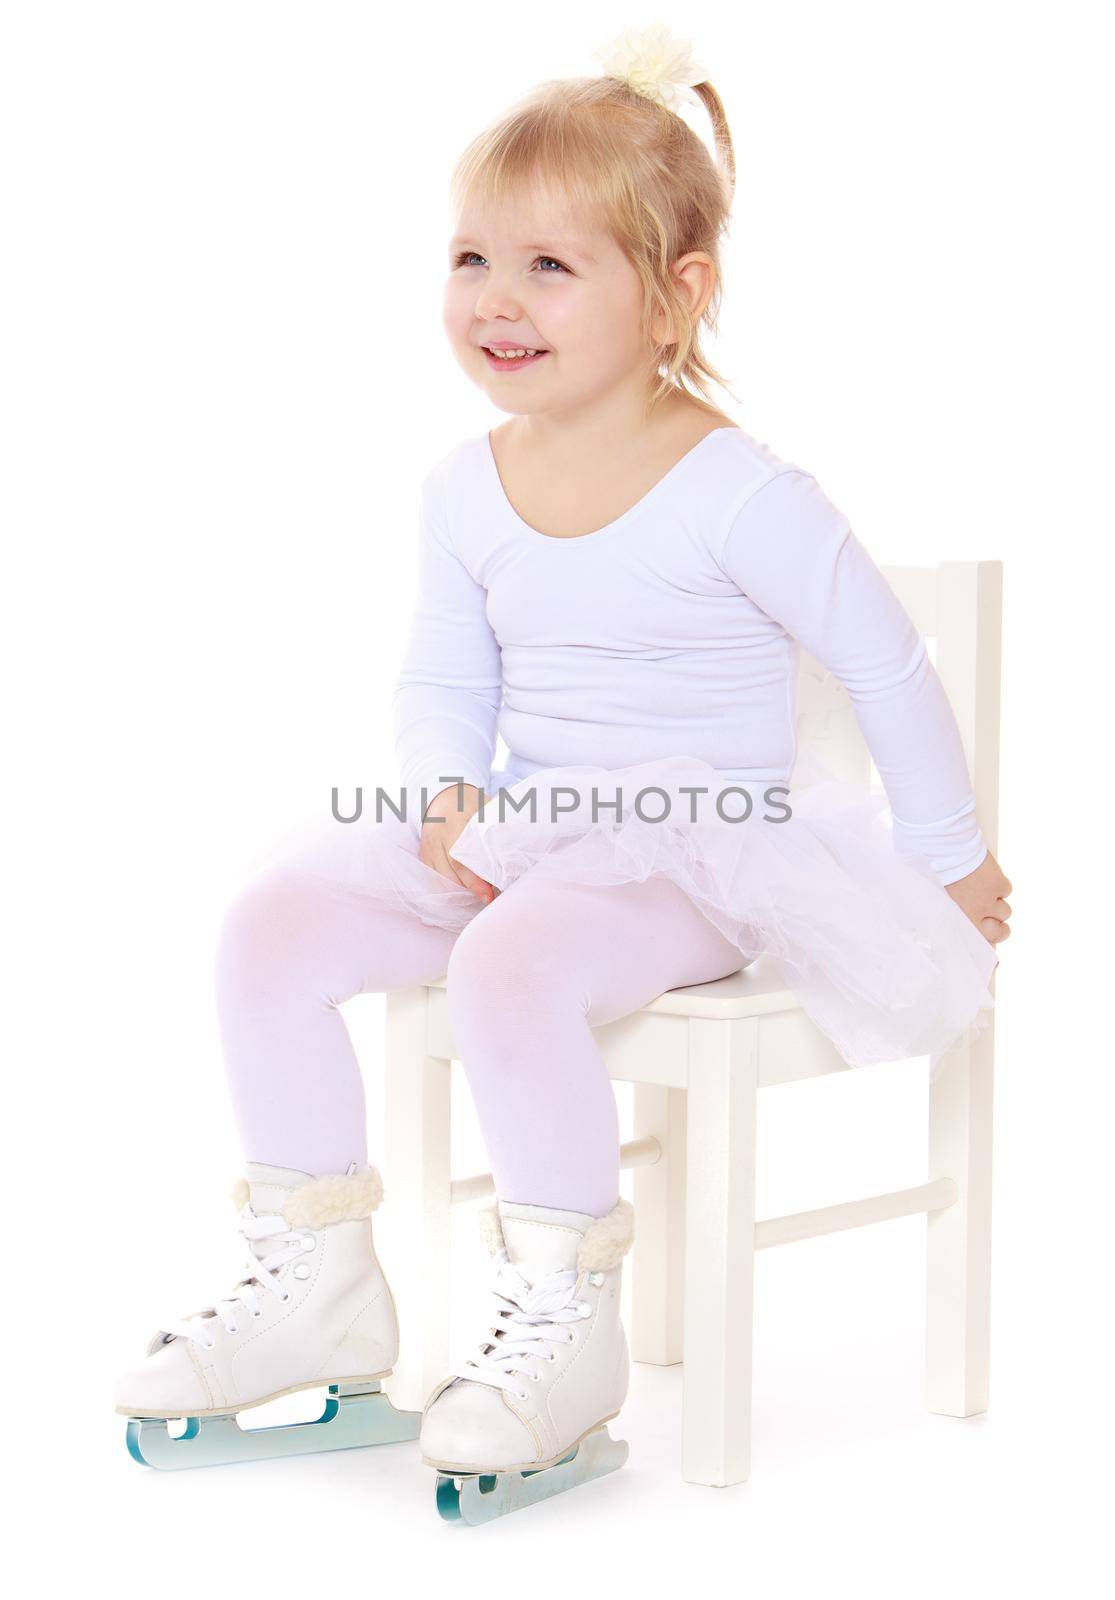 Cute little girl , a future figure skater, sits on a chair in a White sports dress and figure skates on two skids-Isolated on white background